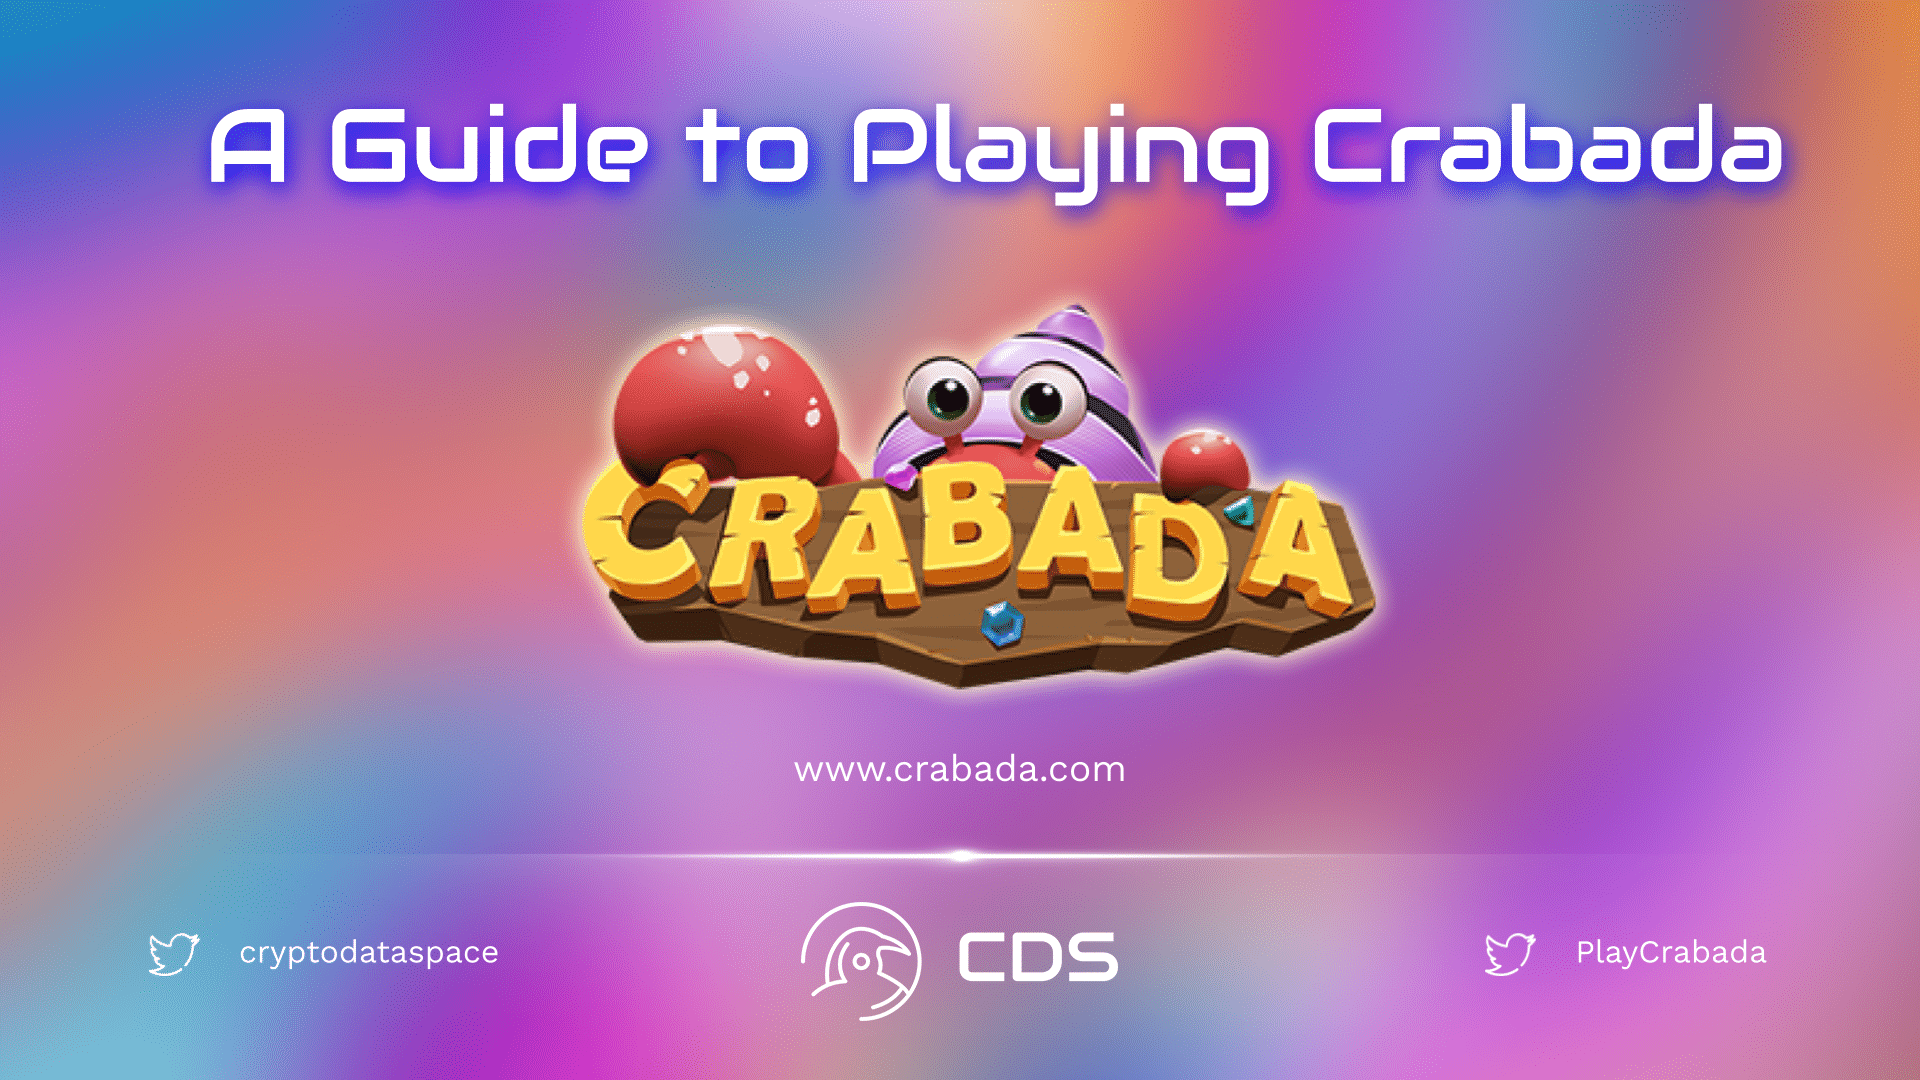 A Guide to Playing Crabada